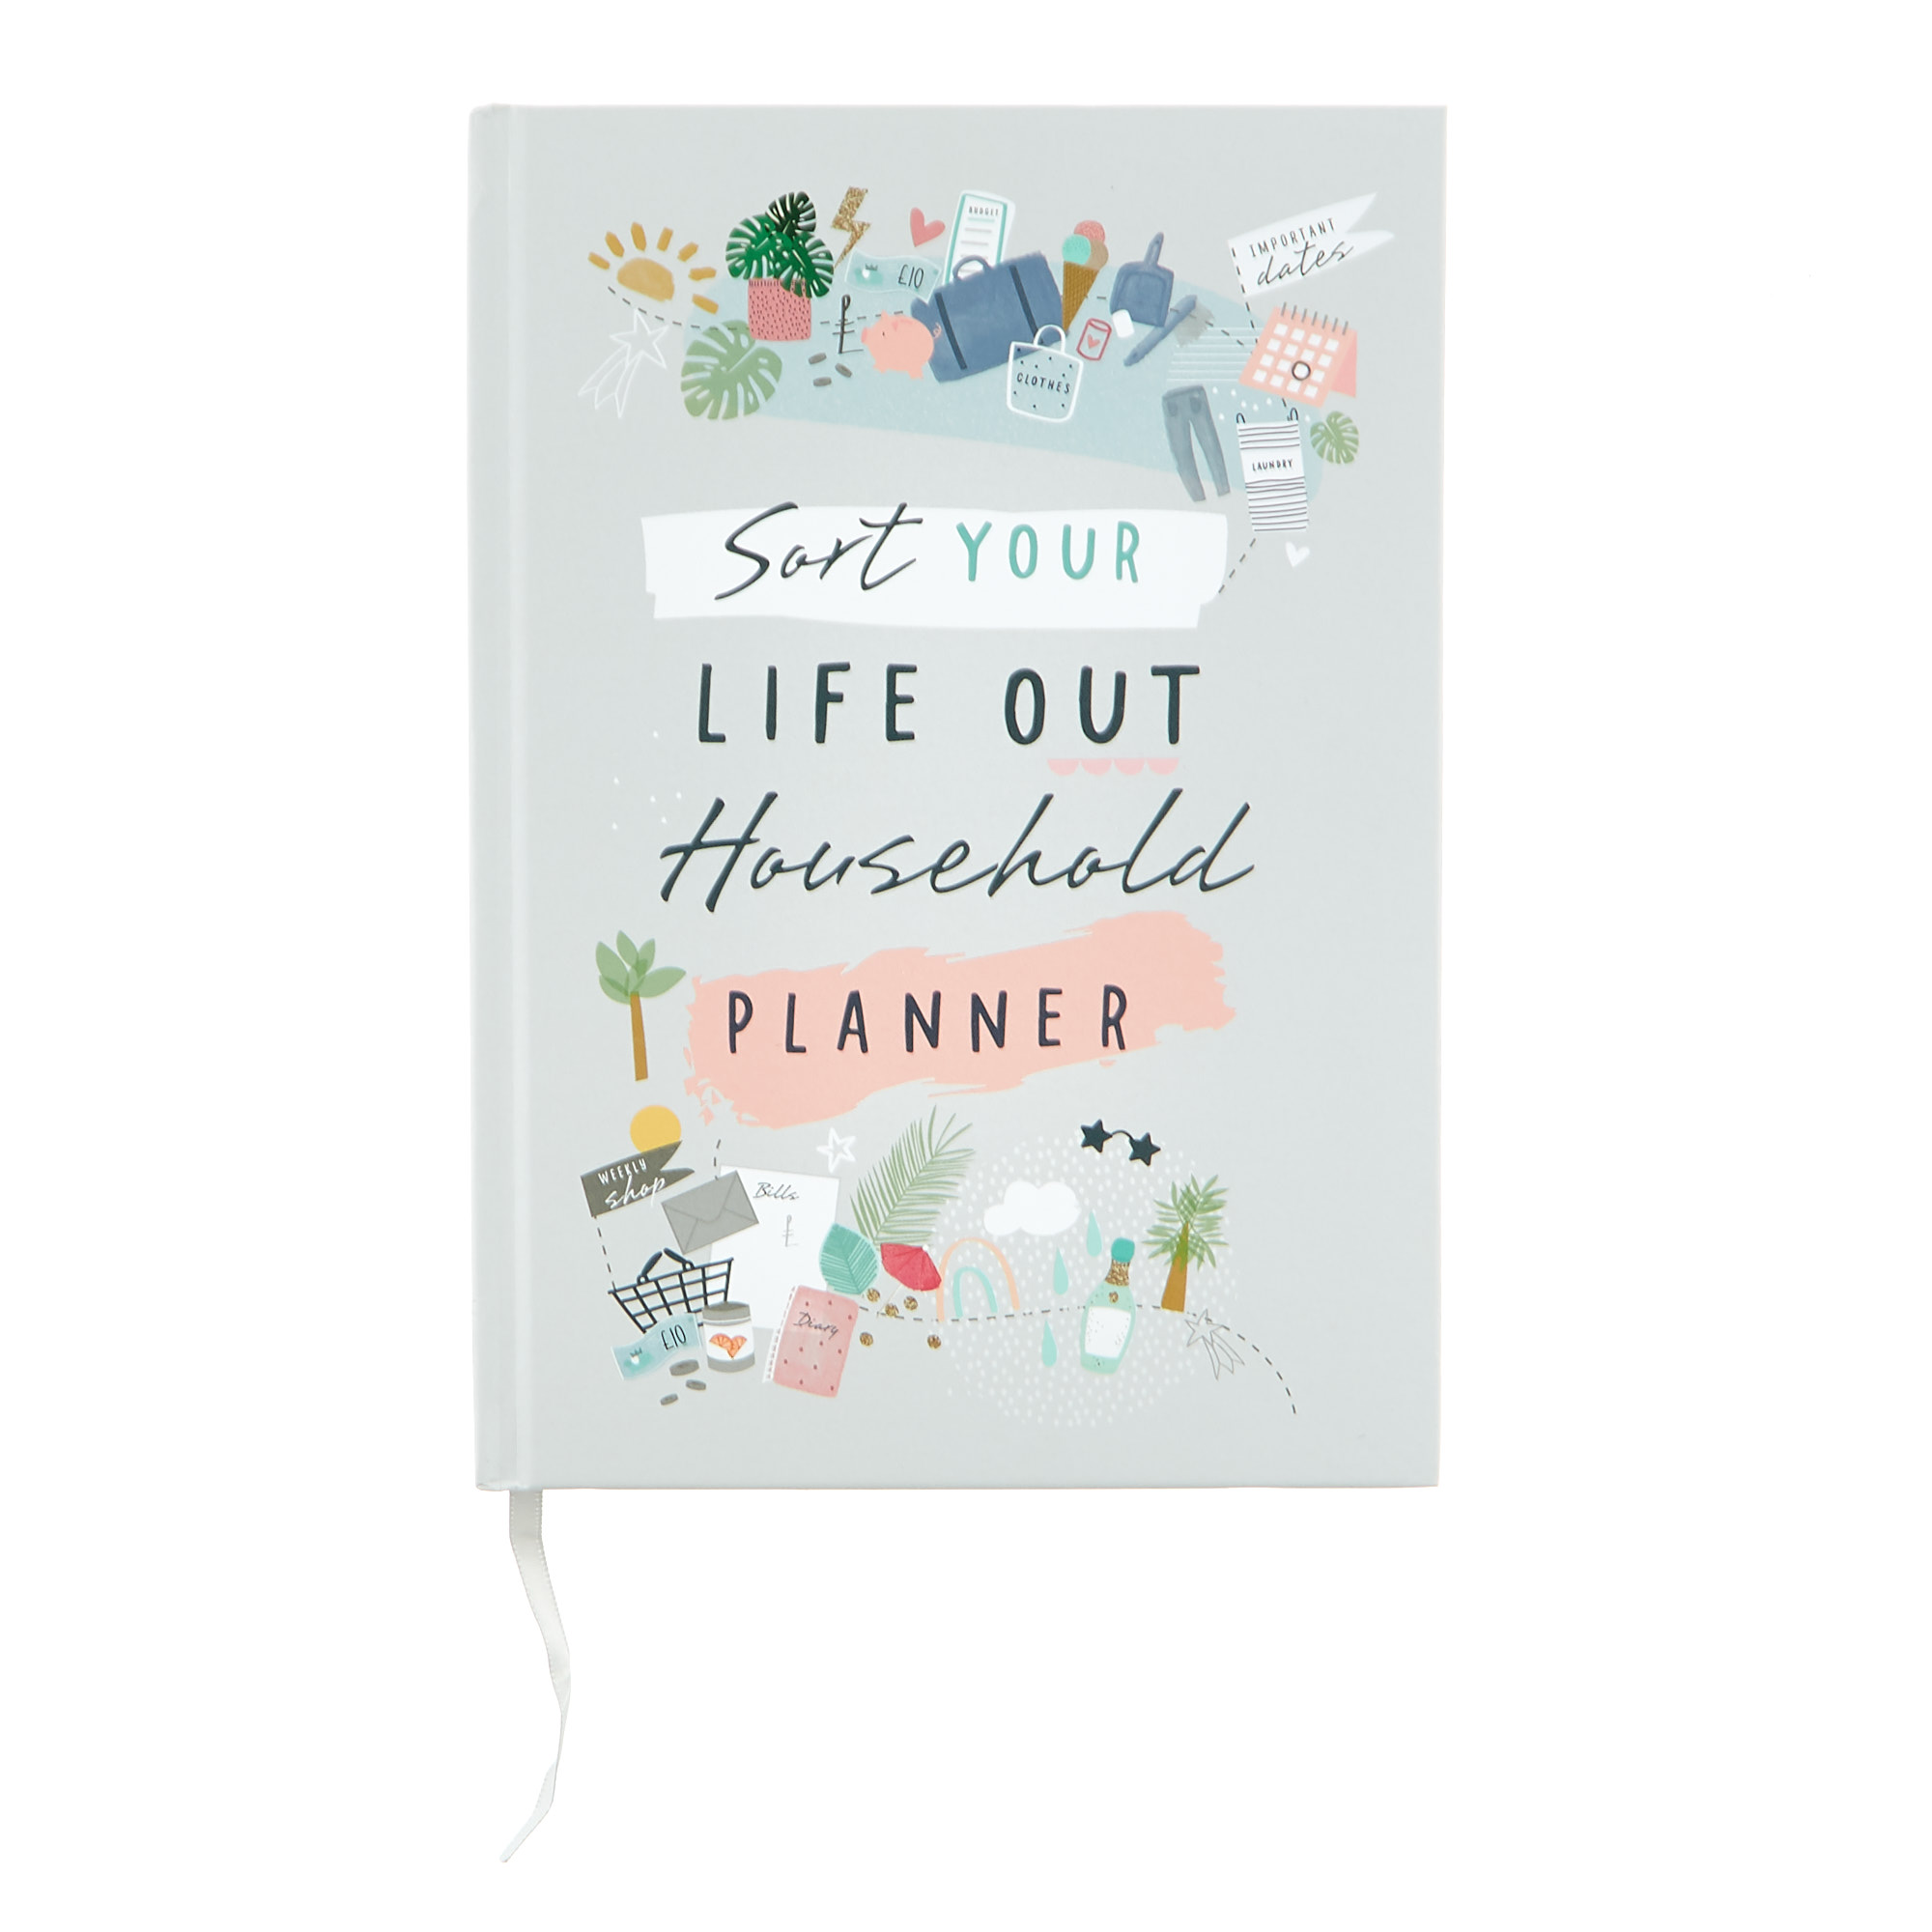 Sort Your Life Out Household Planner